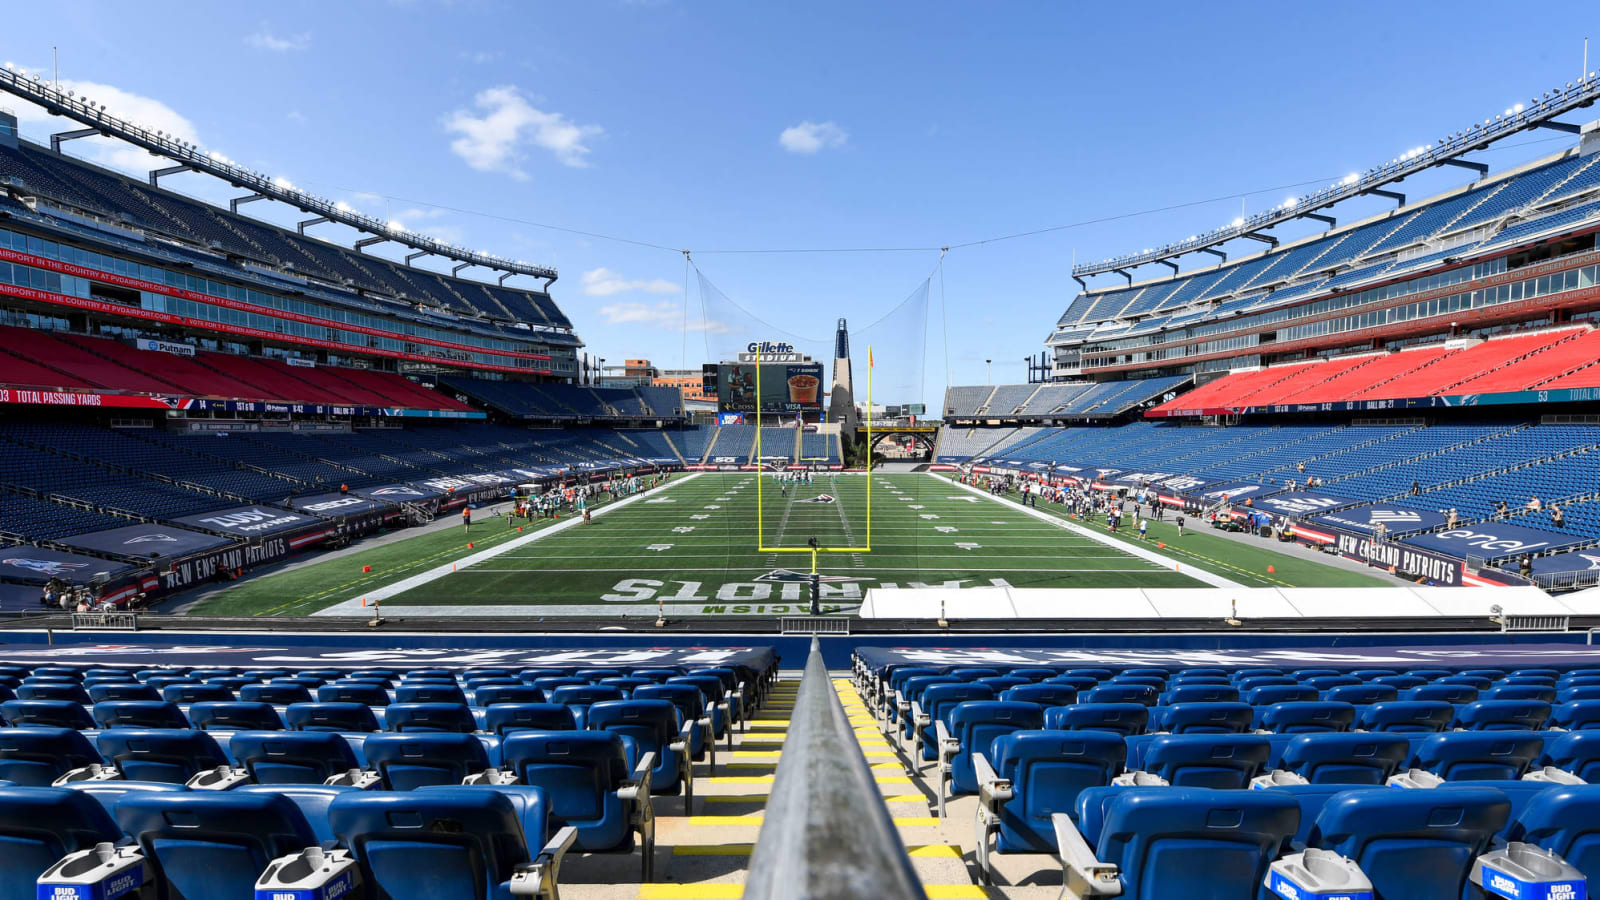 Gillette Stadium has social distancing markers set up for possible return of fans